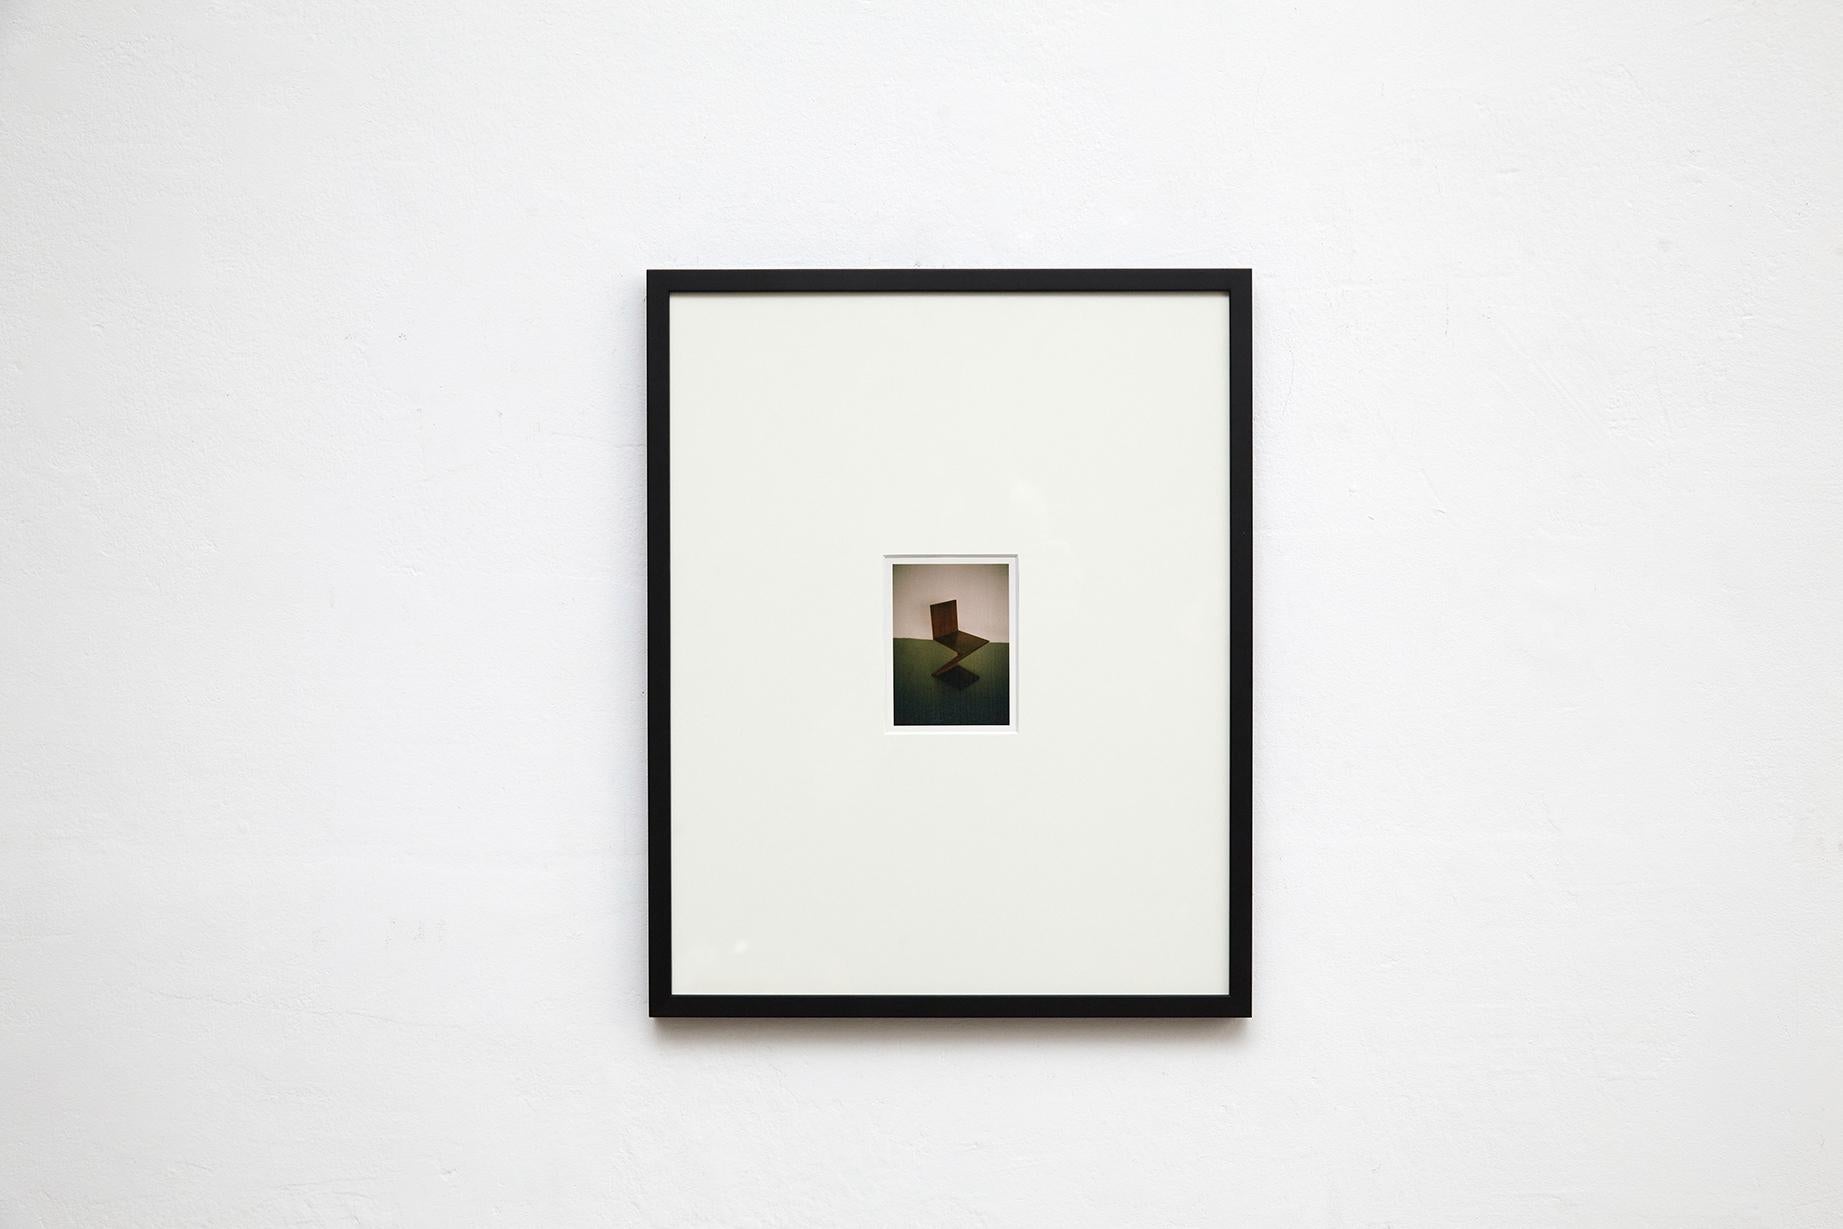 Immerse yourself in the delicate brilliance of David Urbano's framed photography, an untitled gem hailing from the inspiring 'Sit Z' collection. Drawing inspiration from the visionary Gerrit Rietveld, Urbano captures the essence of the Zig Zag